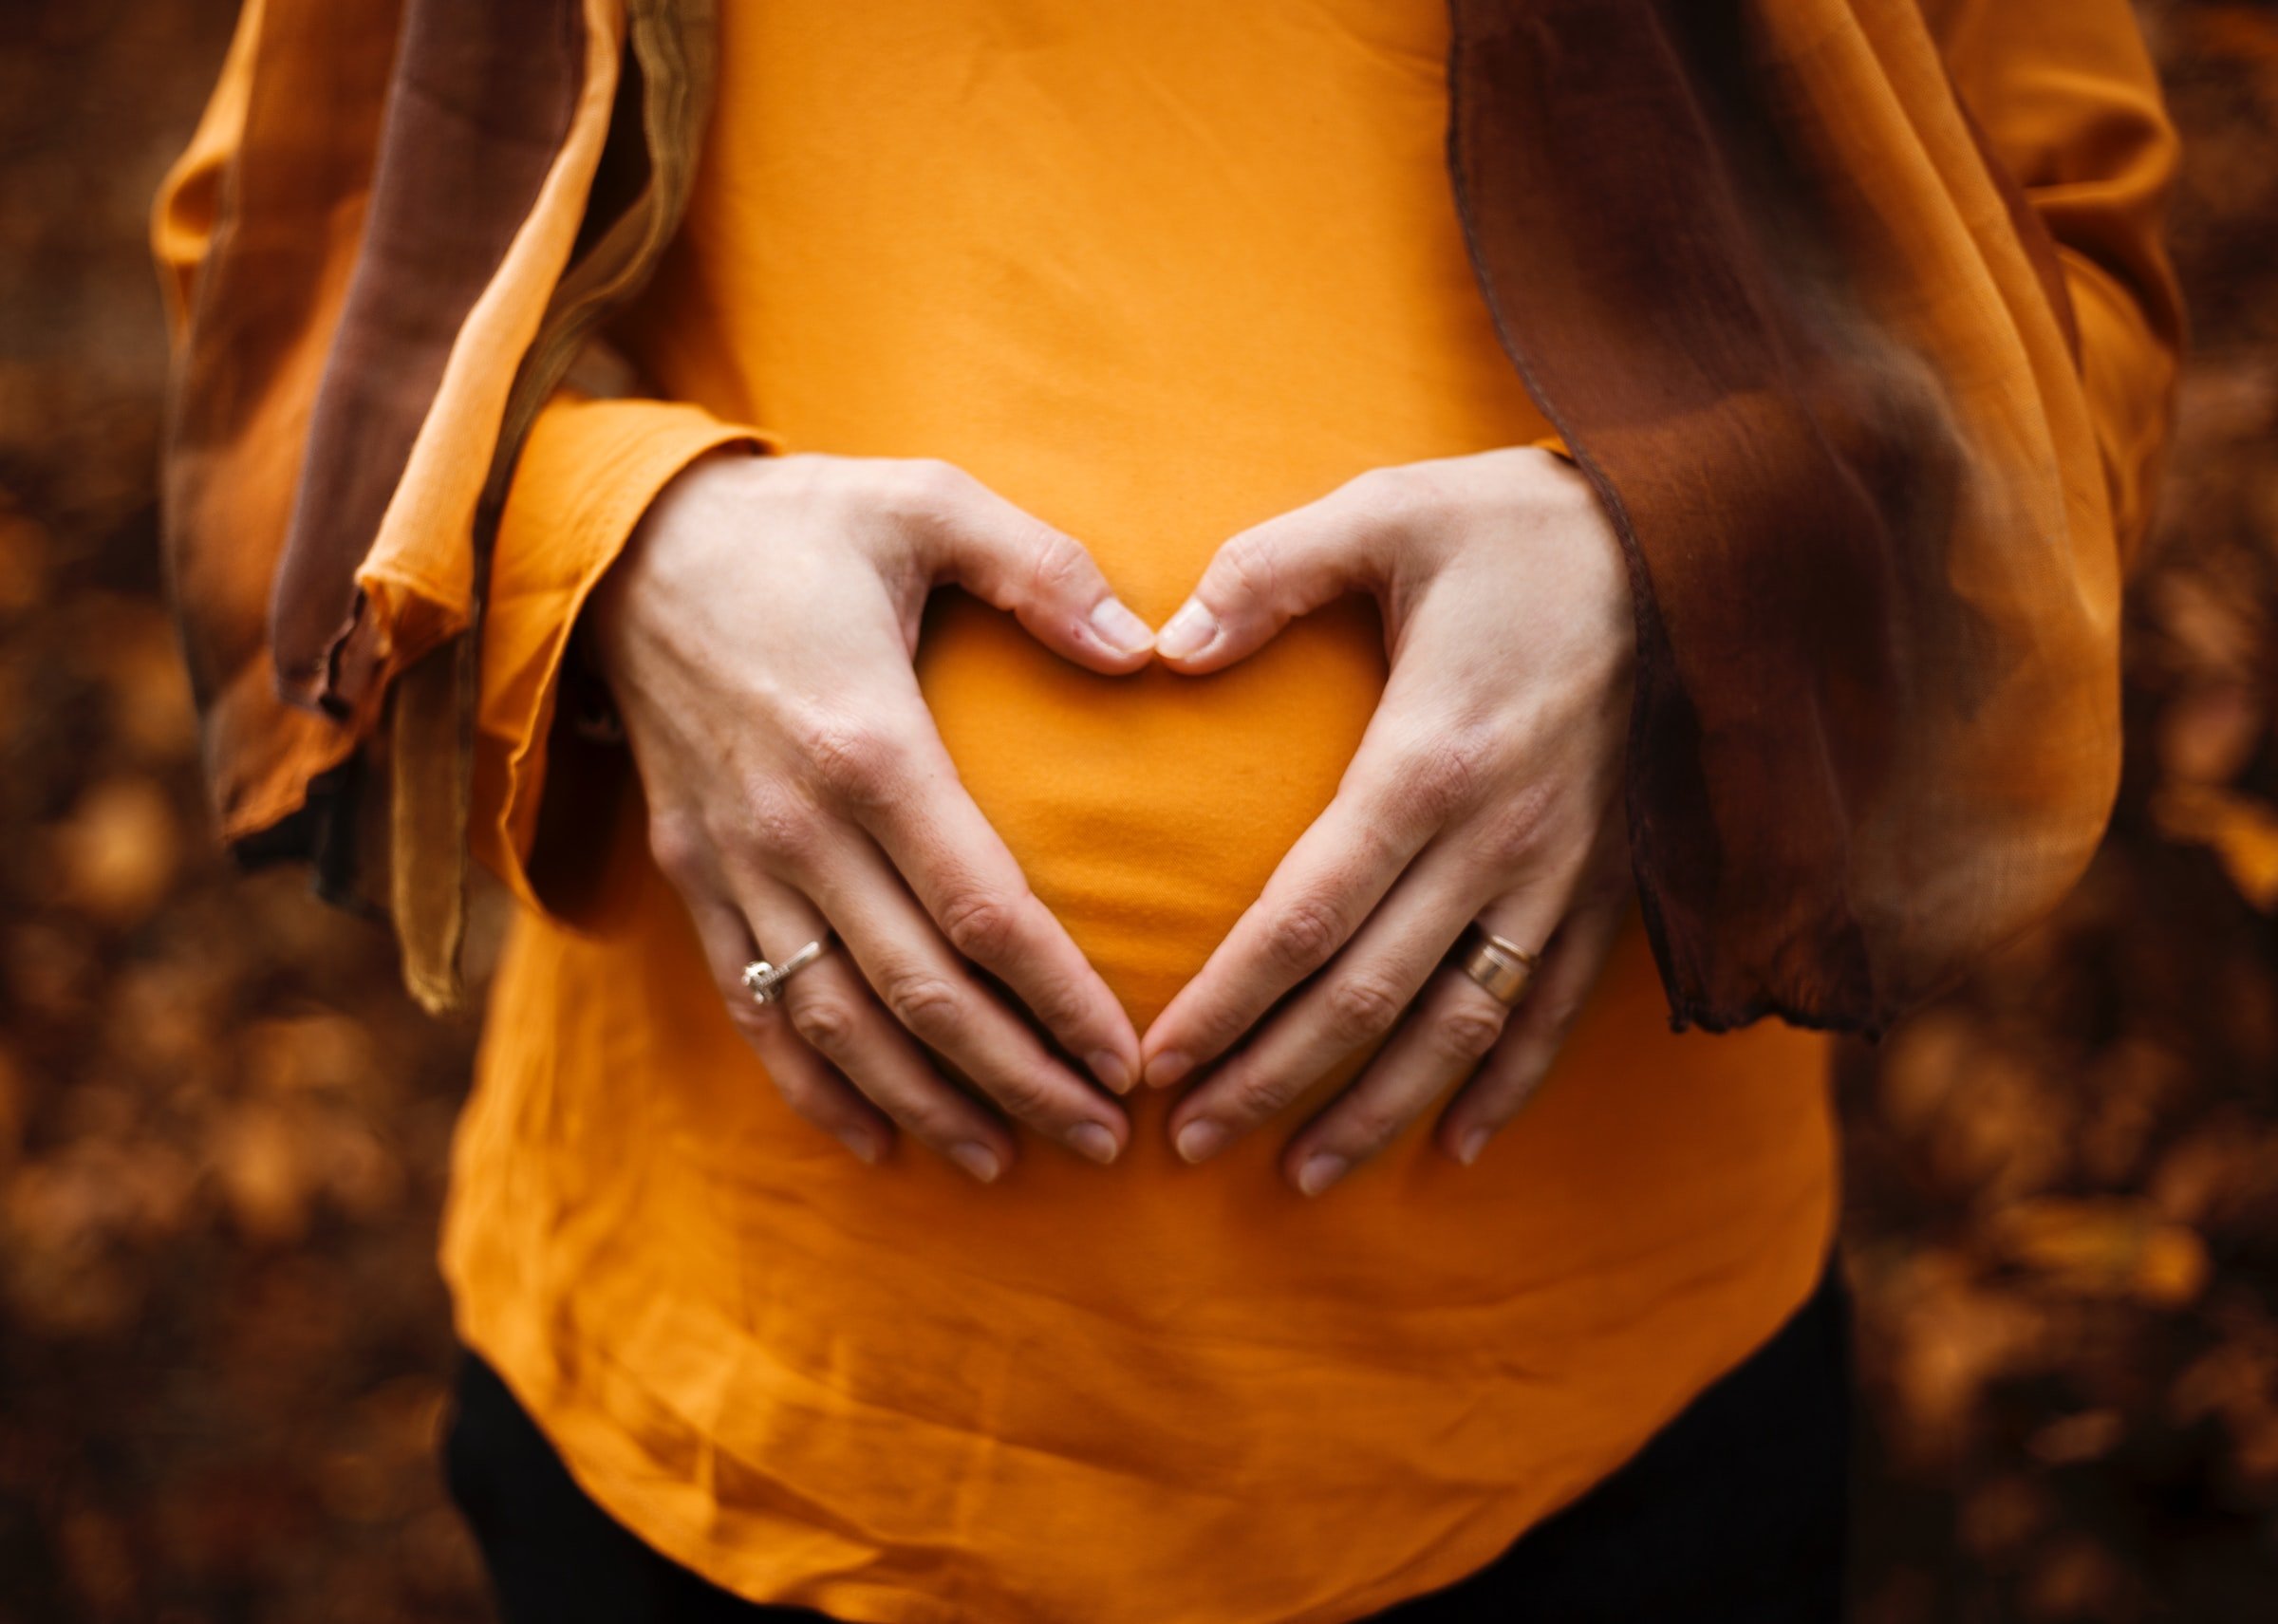 Pregnant woman with hands on her baby bump. | Source: Unsplash